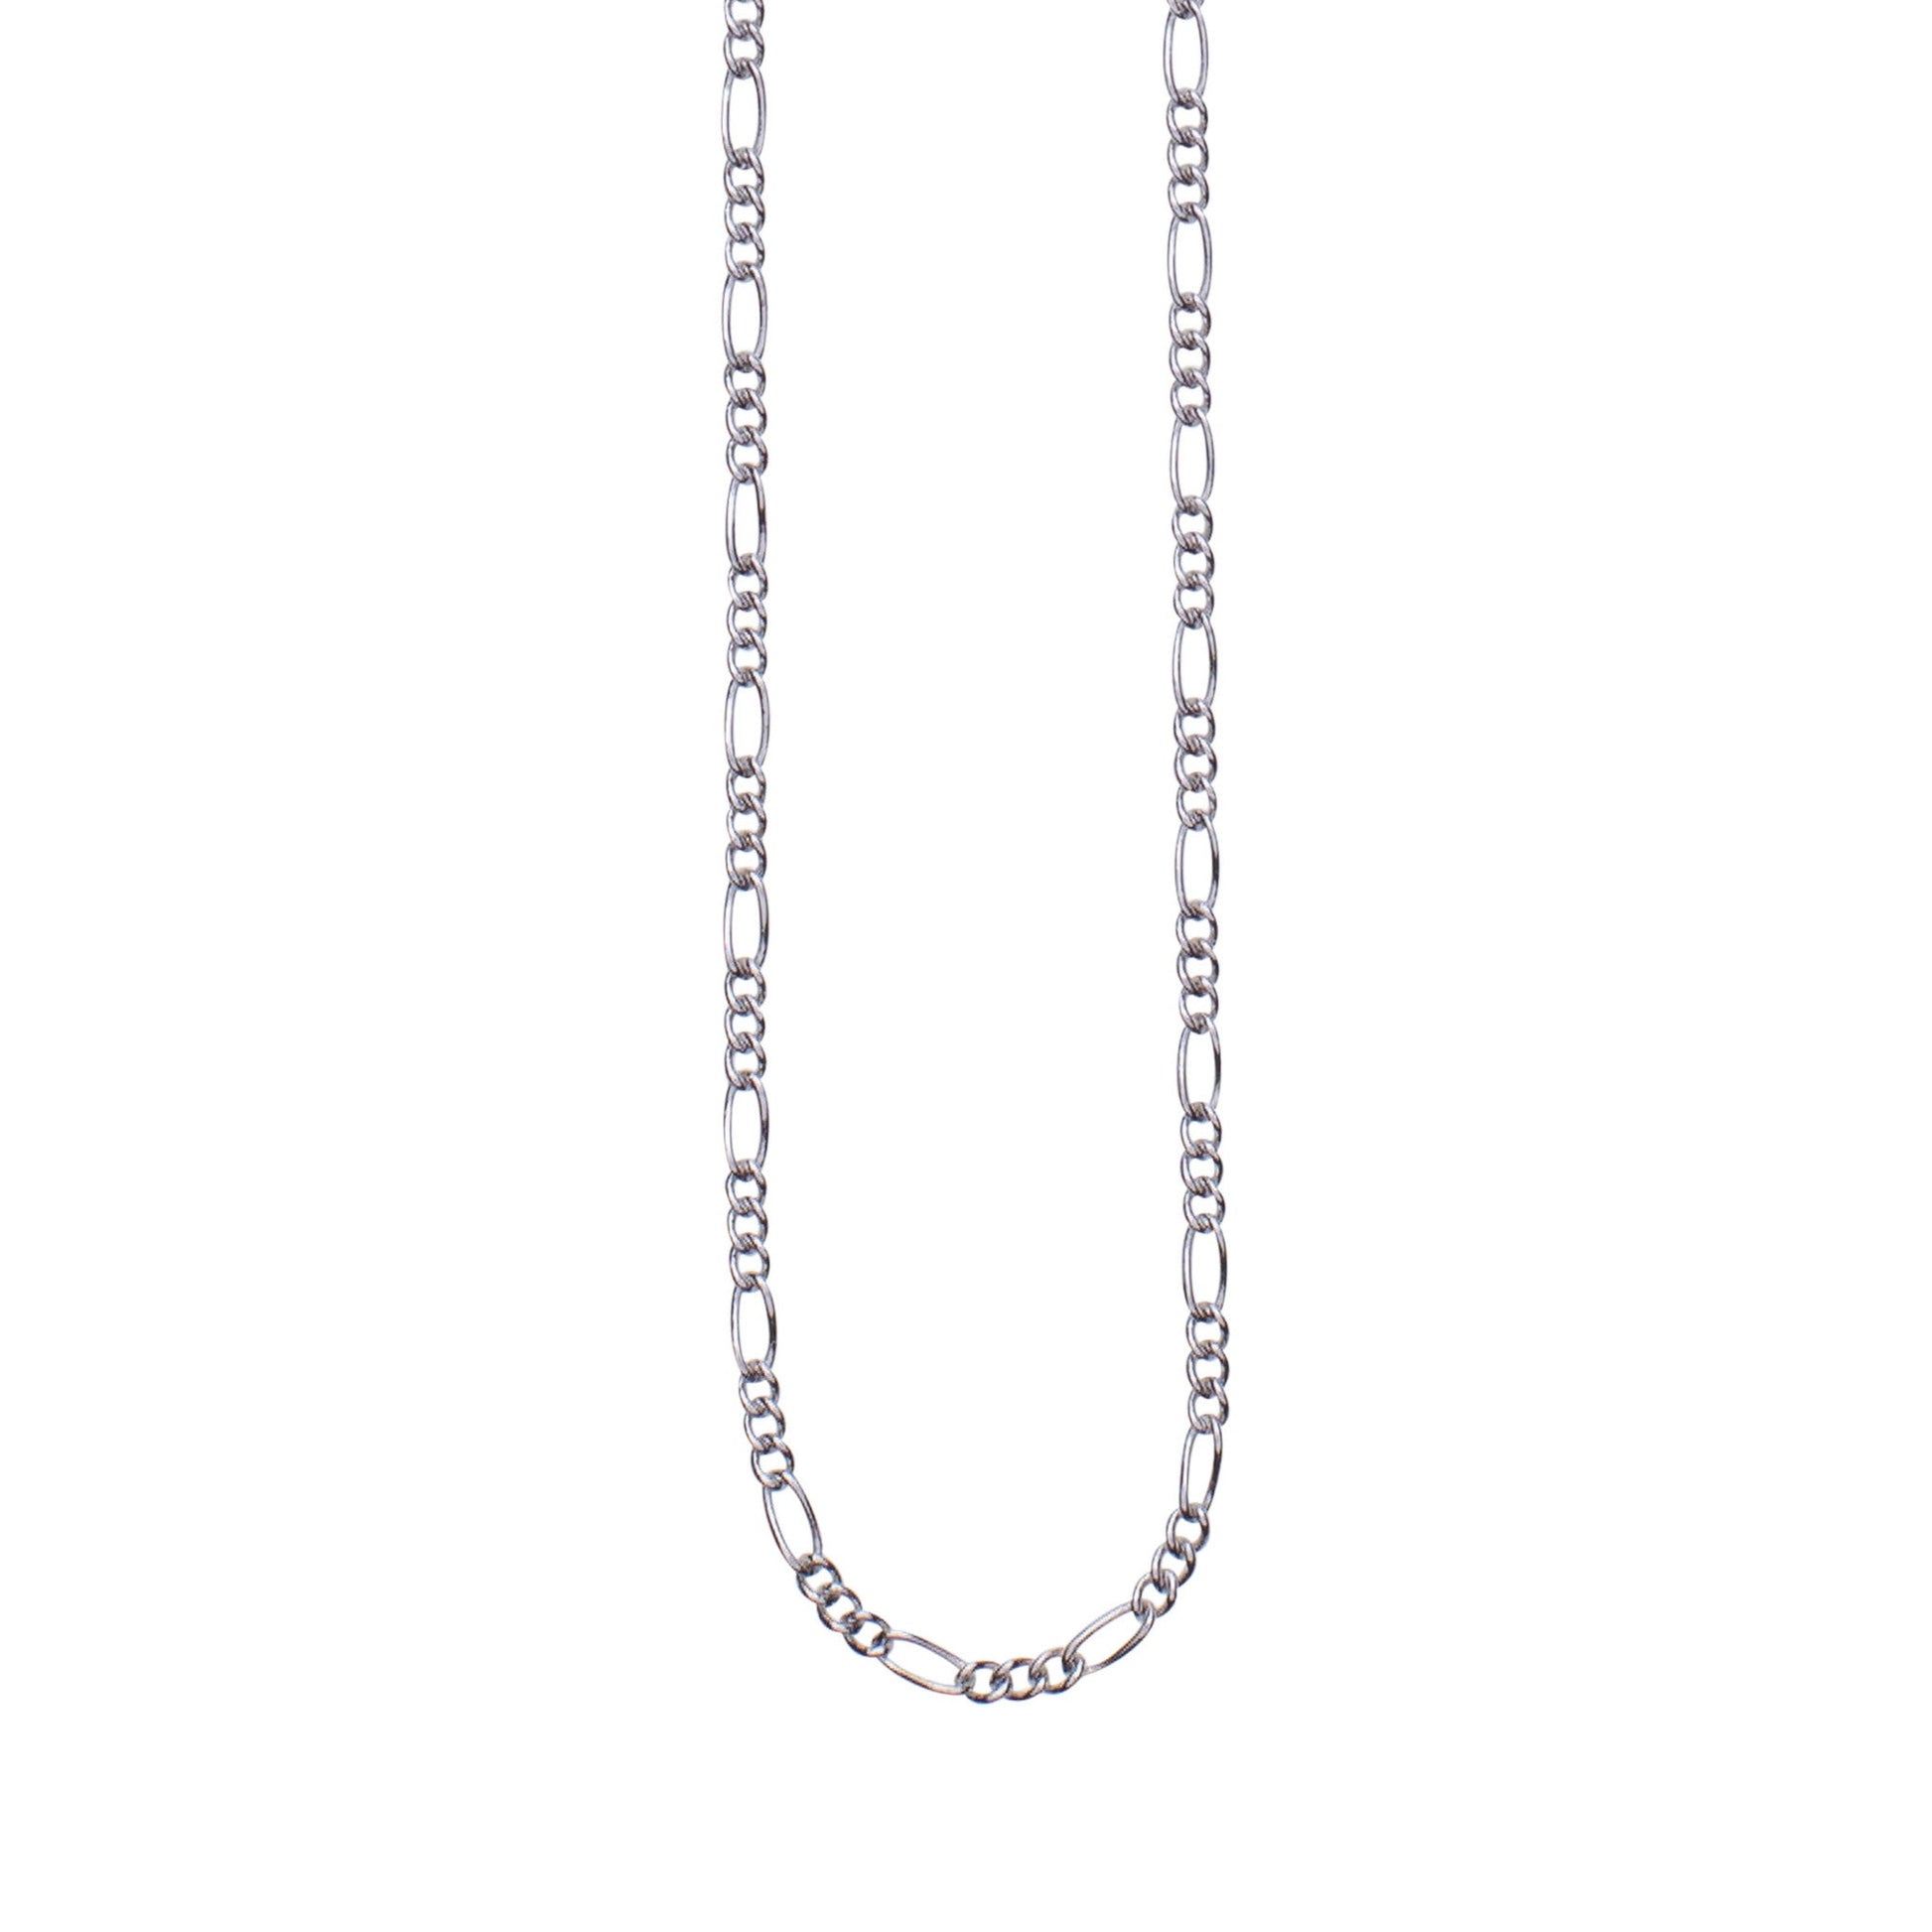 A 16" 1mm figaro chain displayed on a neutral white background.